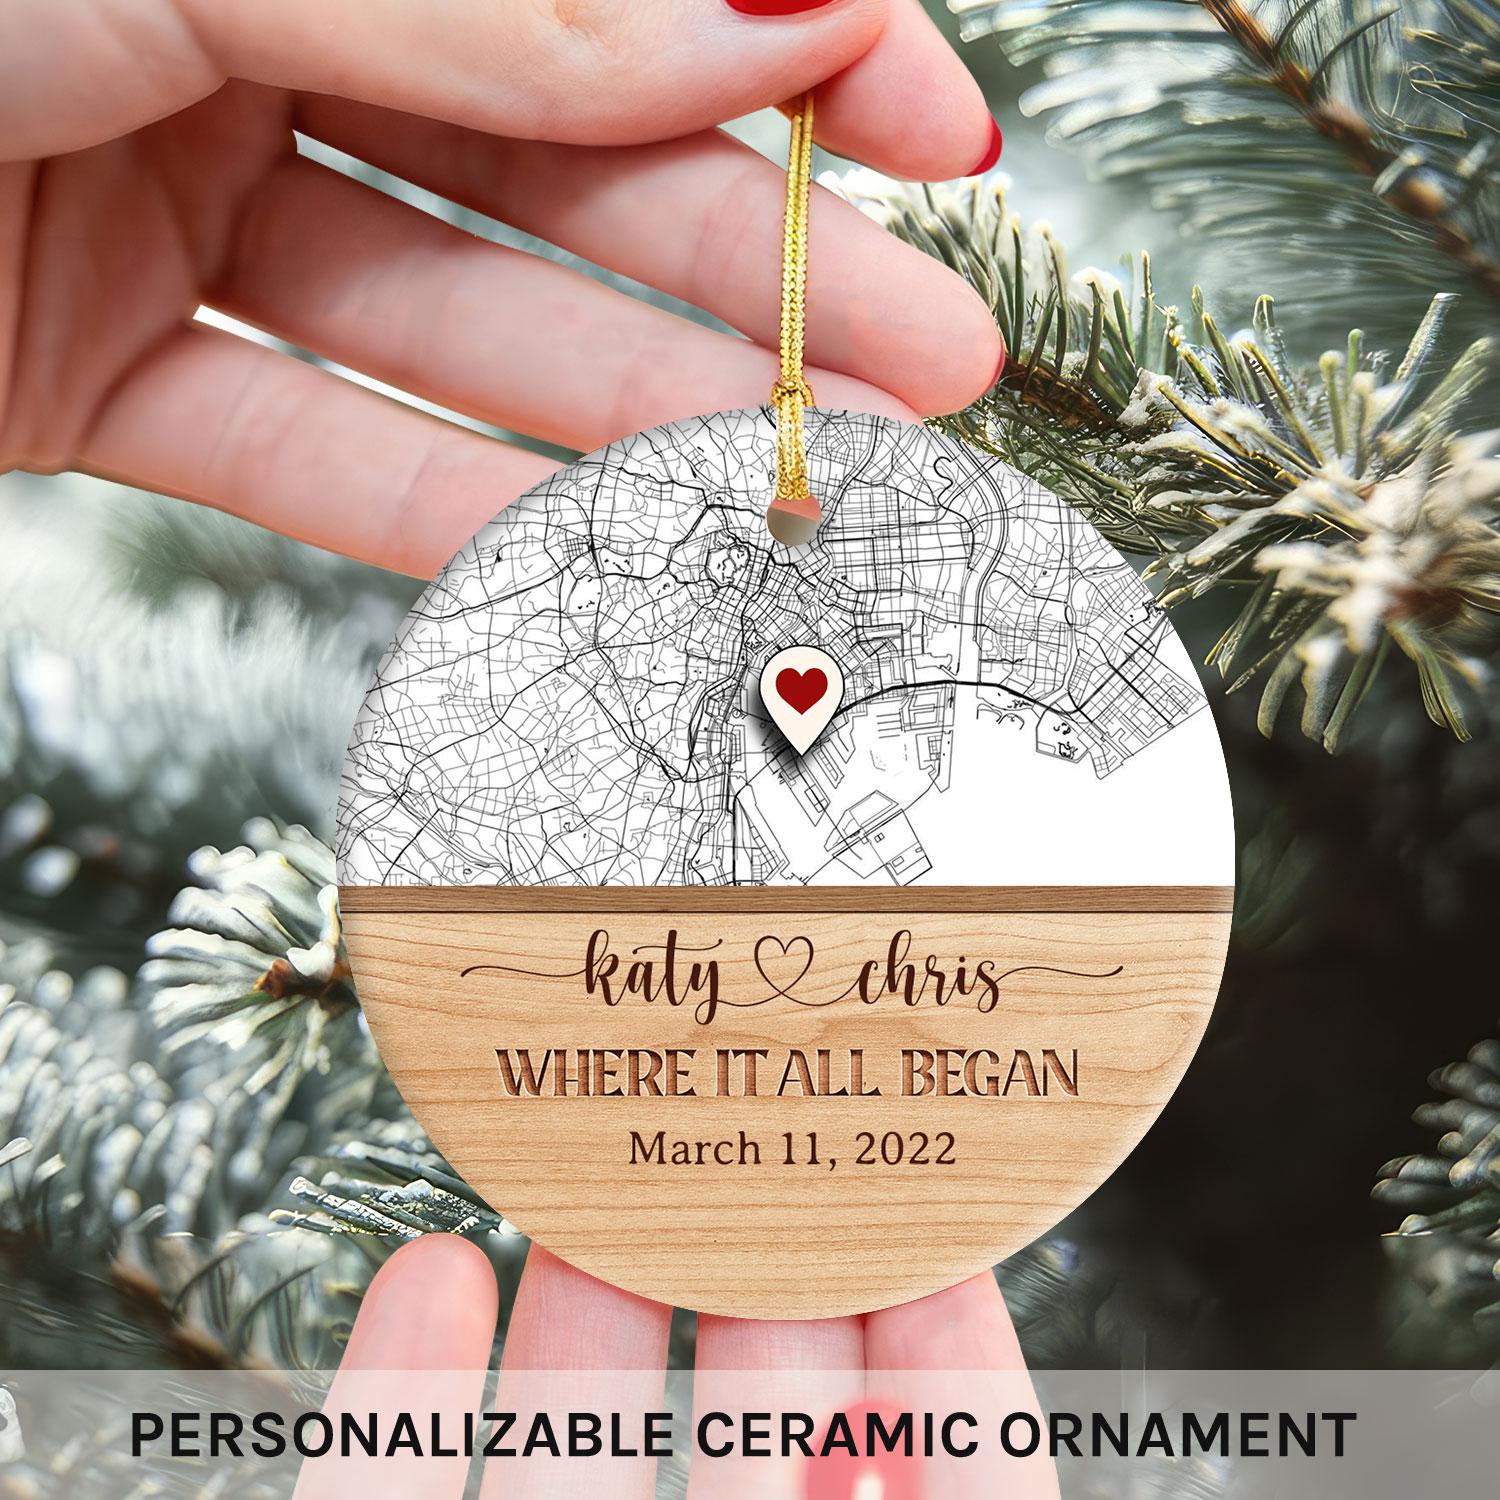 Where It All Began Map - Personalized Anniversary or Valentine's Day gift for Husband or Wife - Custom Circle Ceramic Ornament - MyMindfulGifts